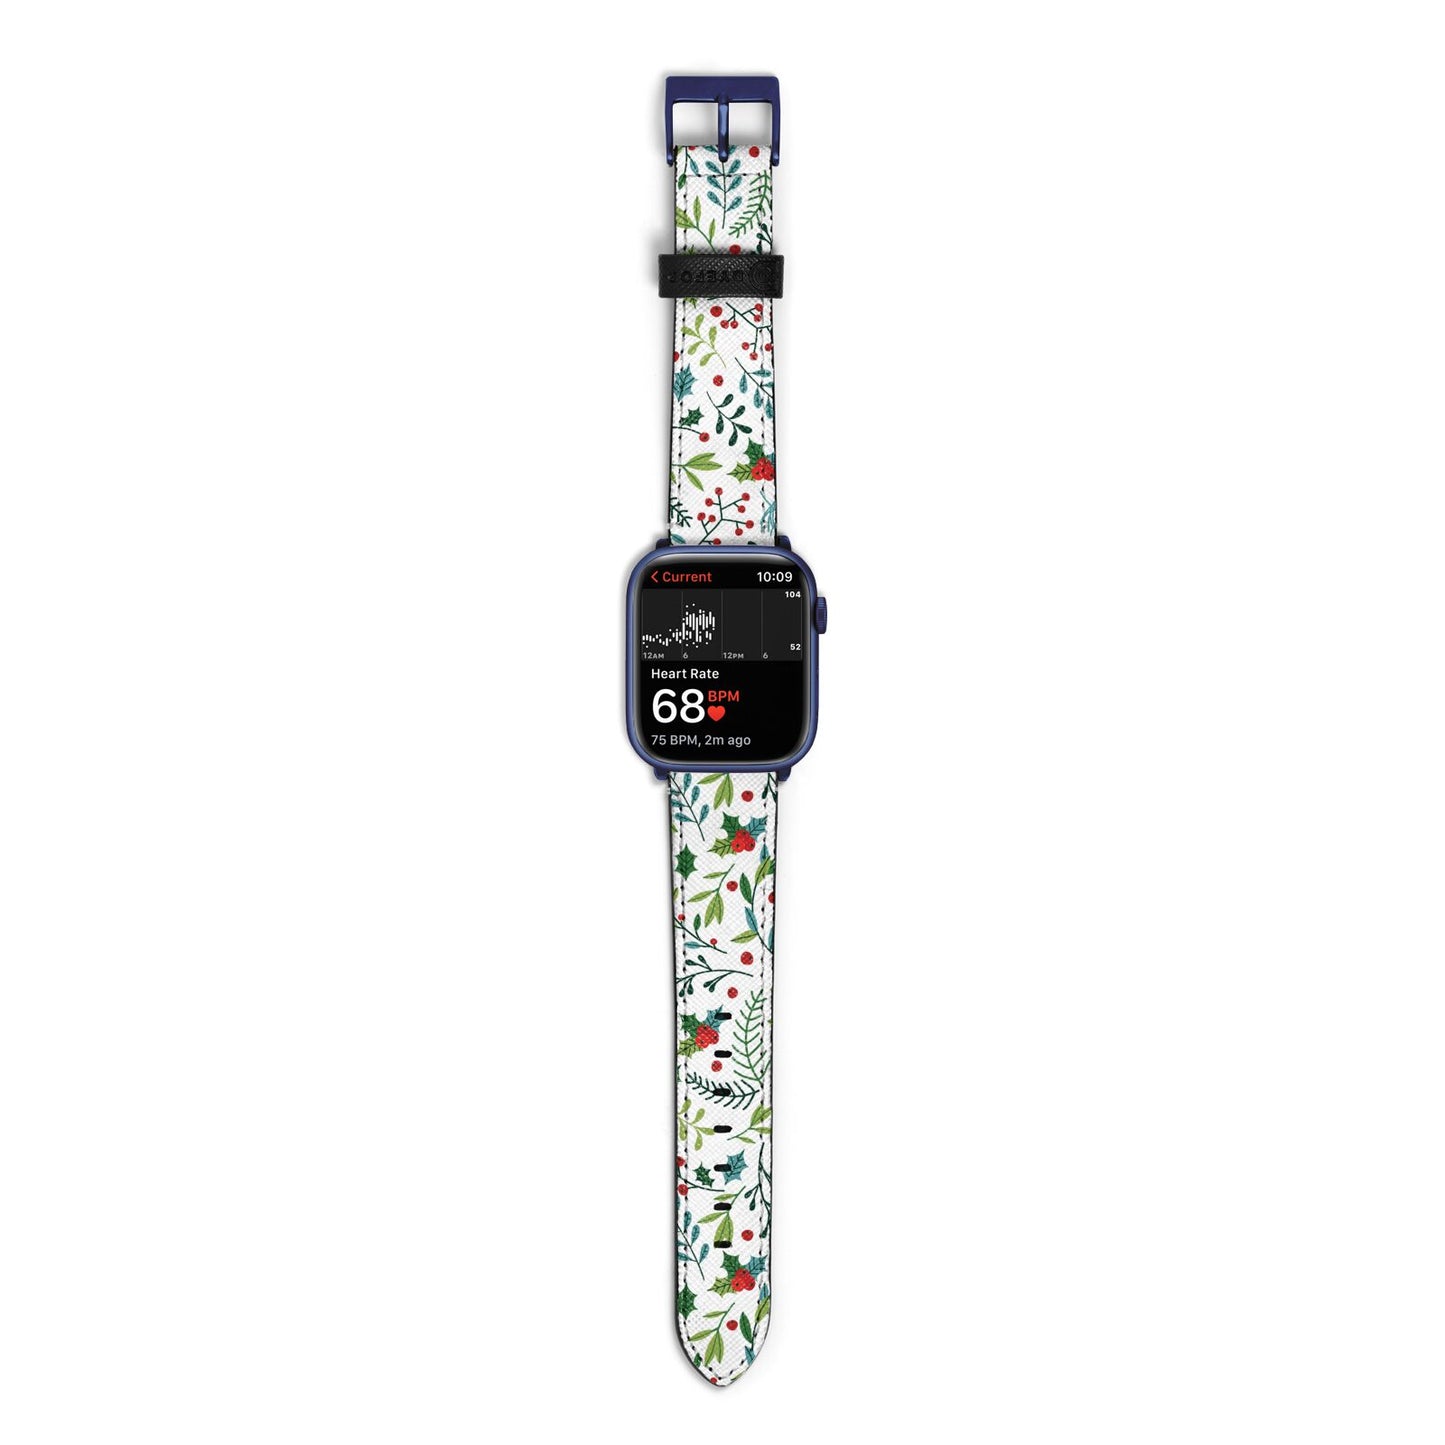 Winter Floral Apple Watch Strap Size 38mm with Blue Hardware